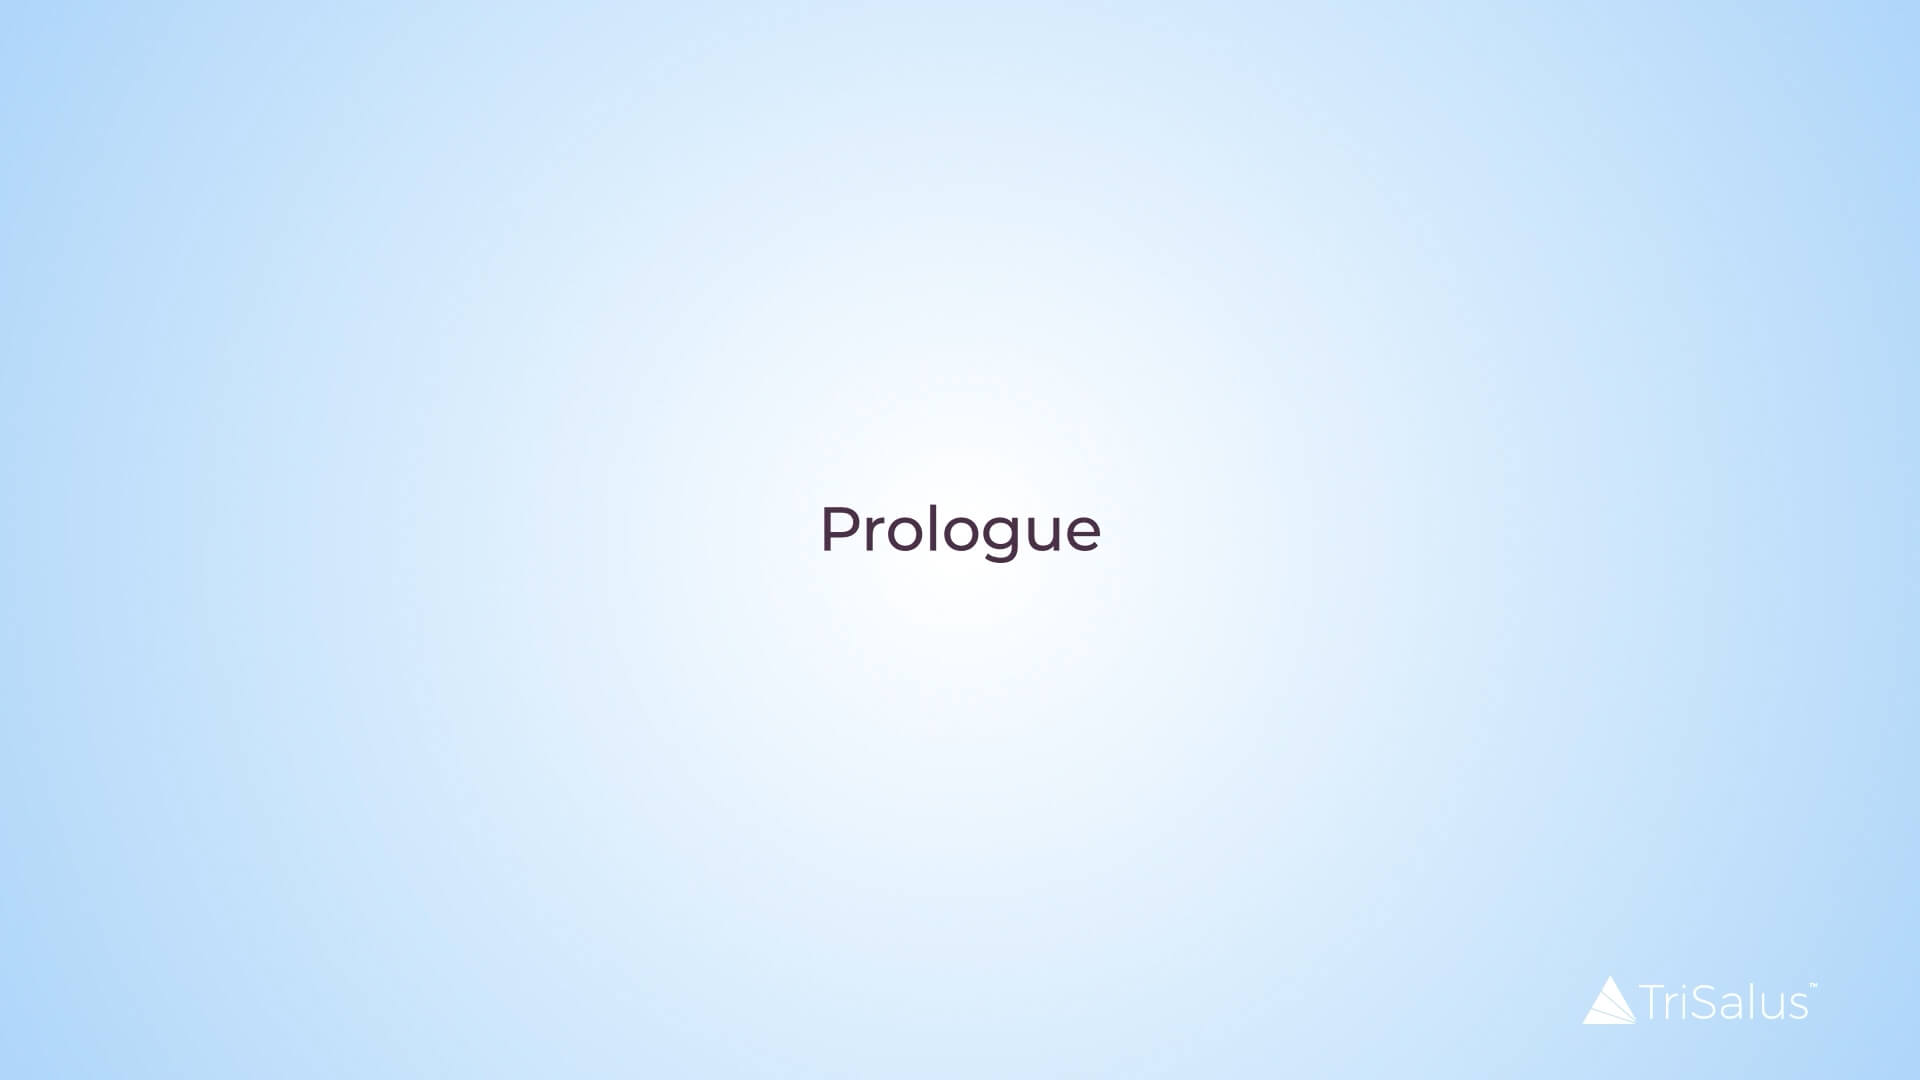 Video Thumbnail with text: Prologue